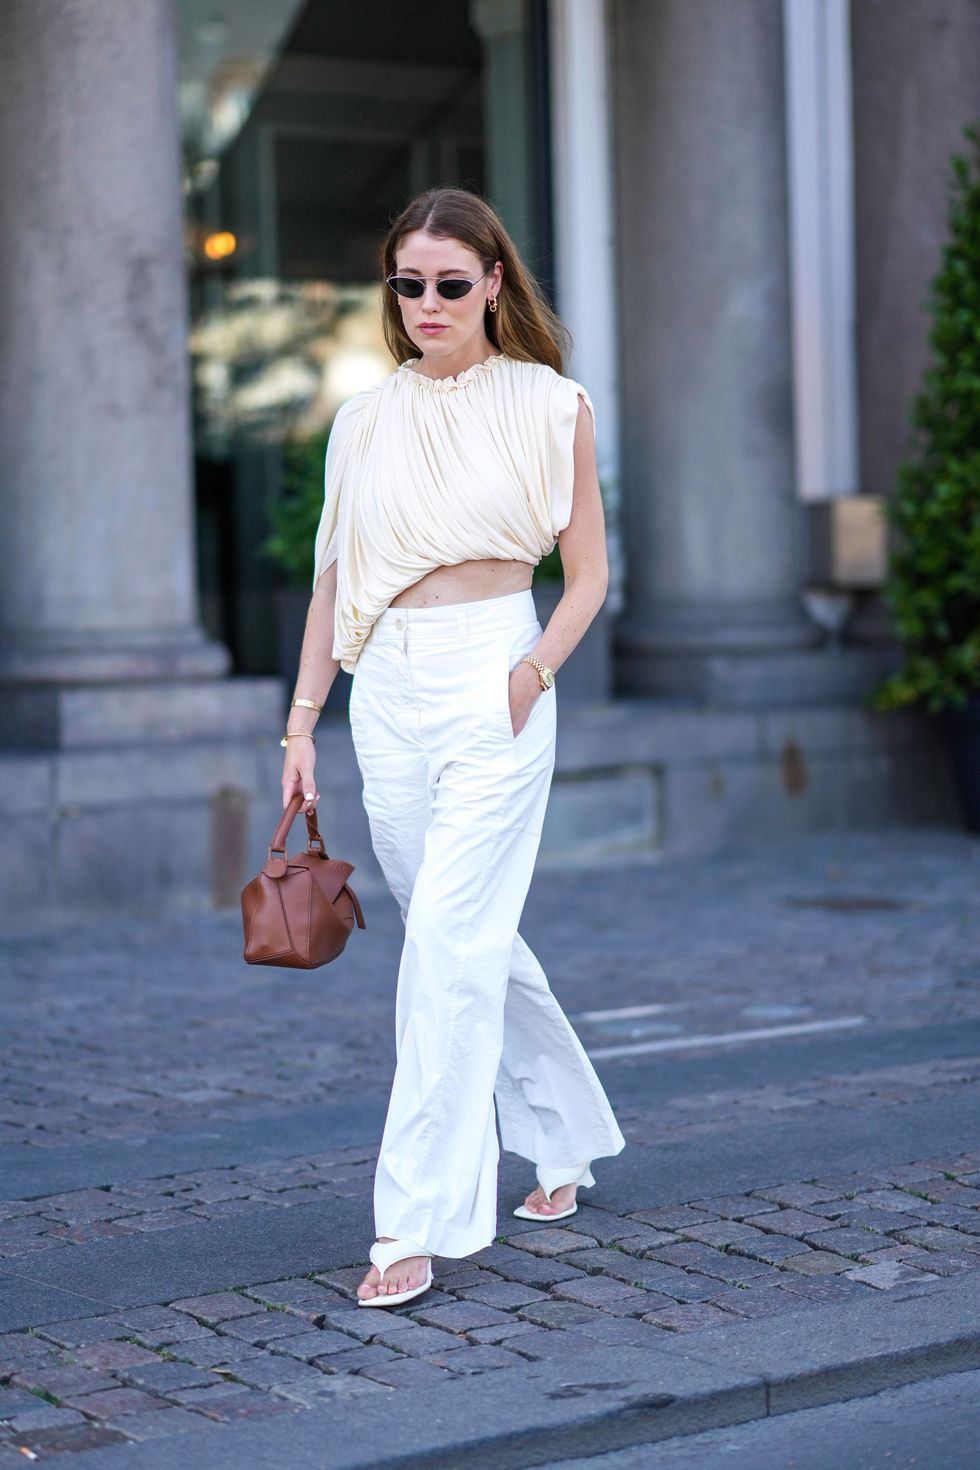 blouse and white pants summer outfit idea